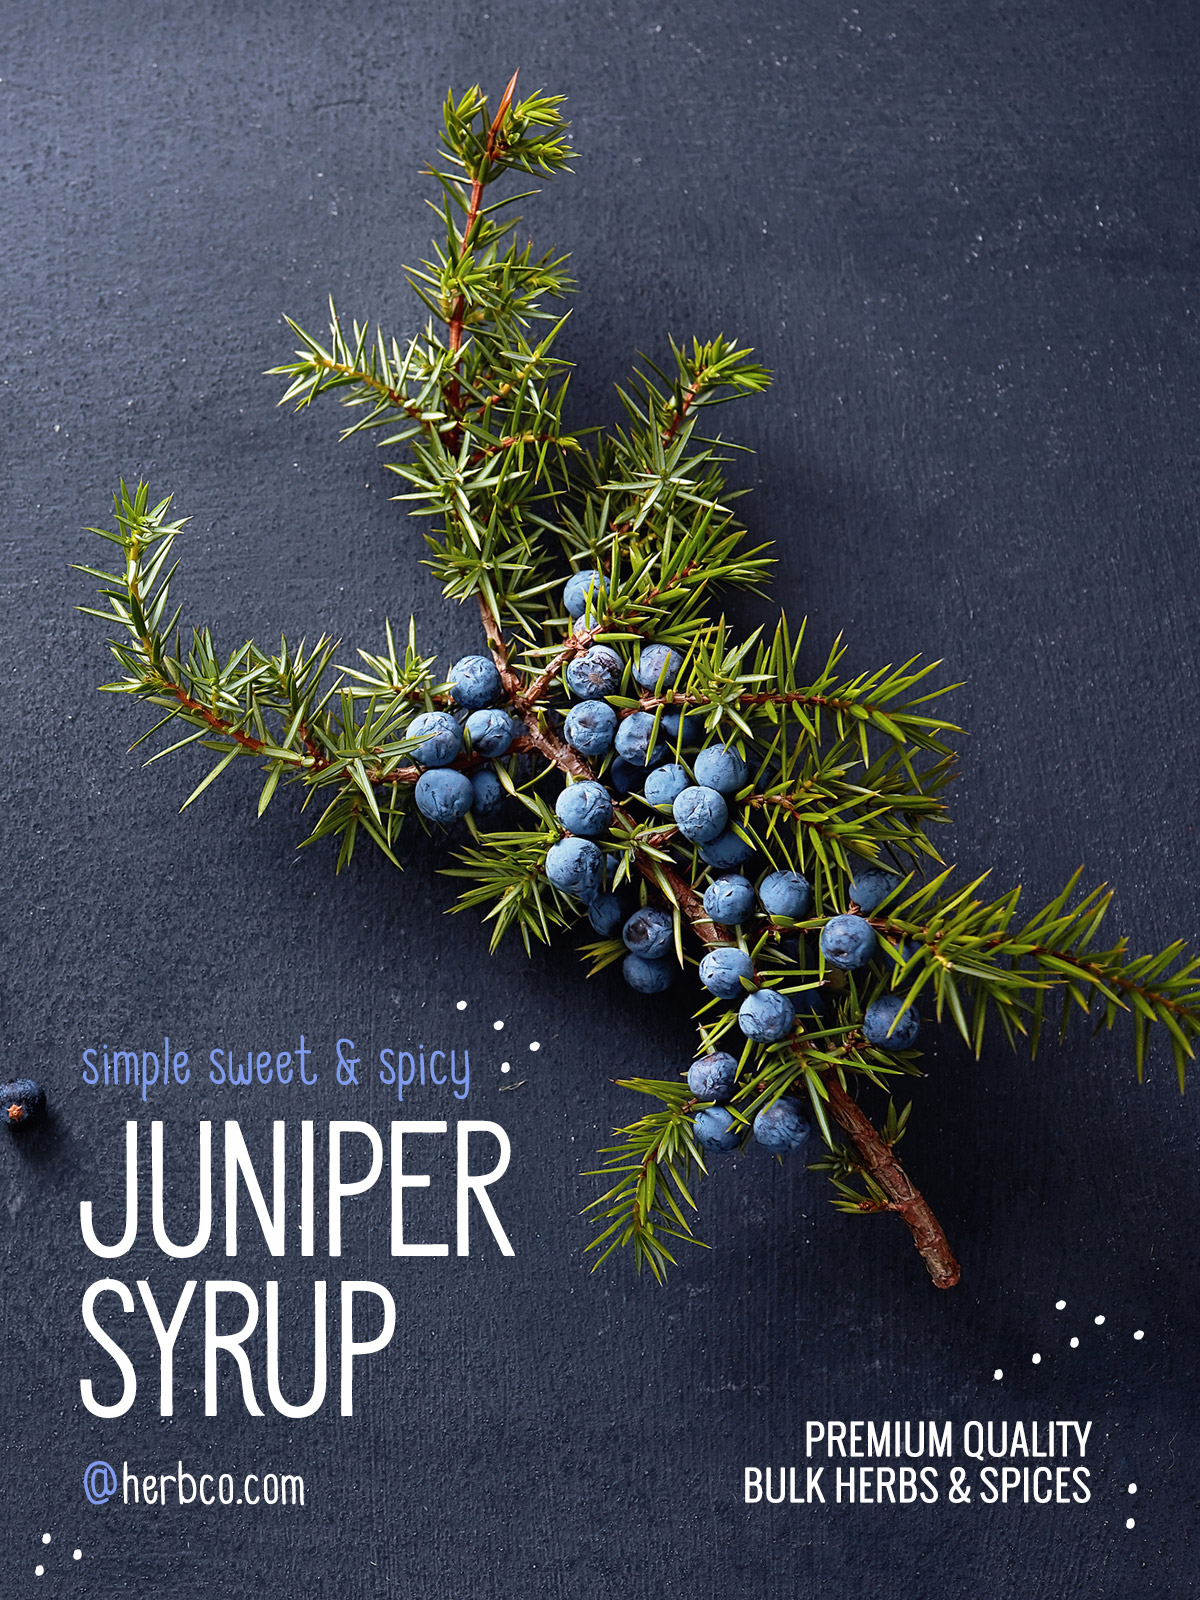 [ Recipe: Simple Sweet & Spicy Juniper Syrup ] ~ from Monterey Bay Herb Co